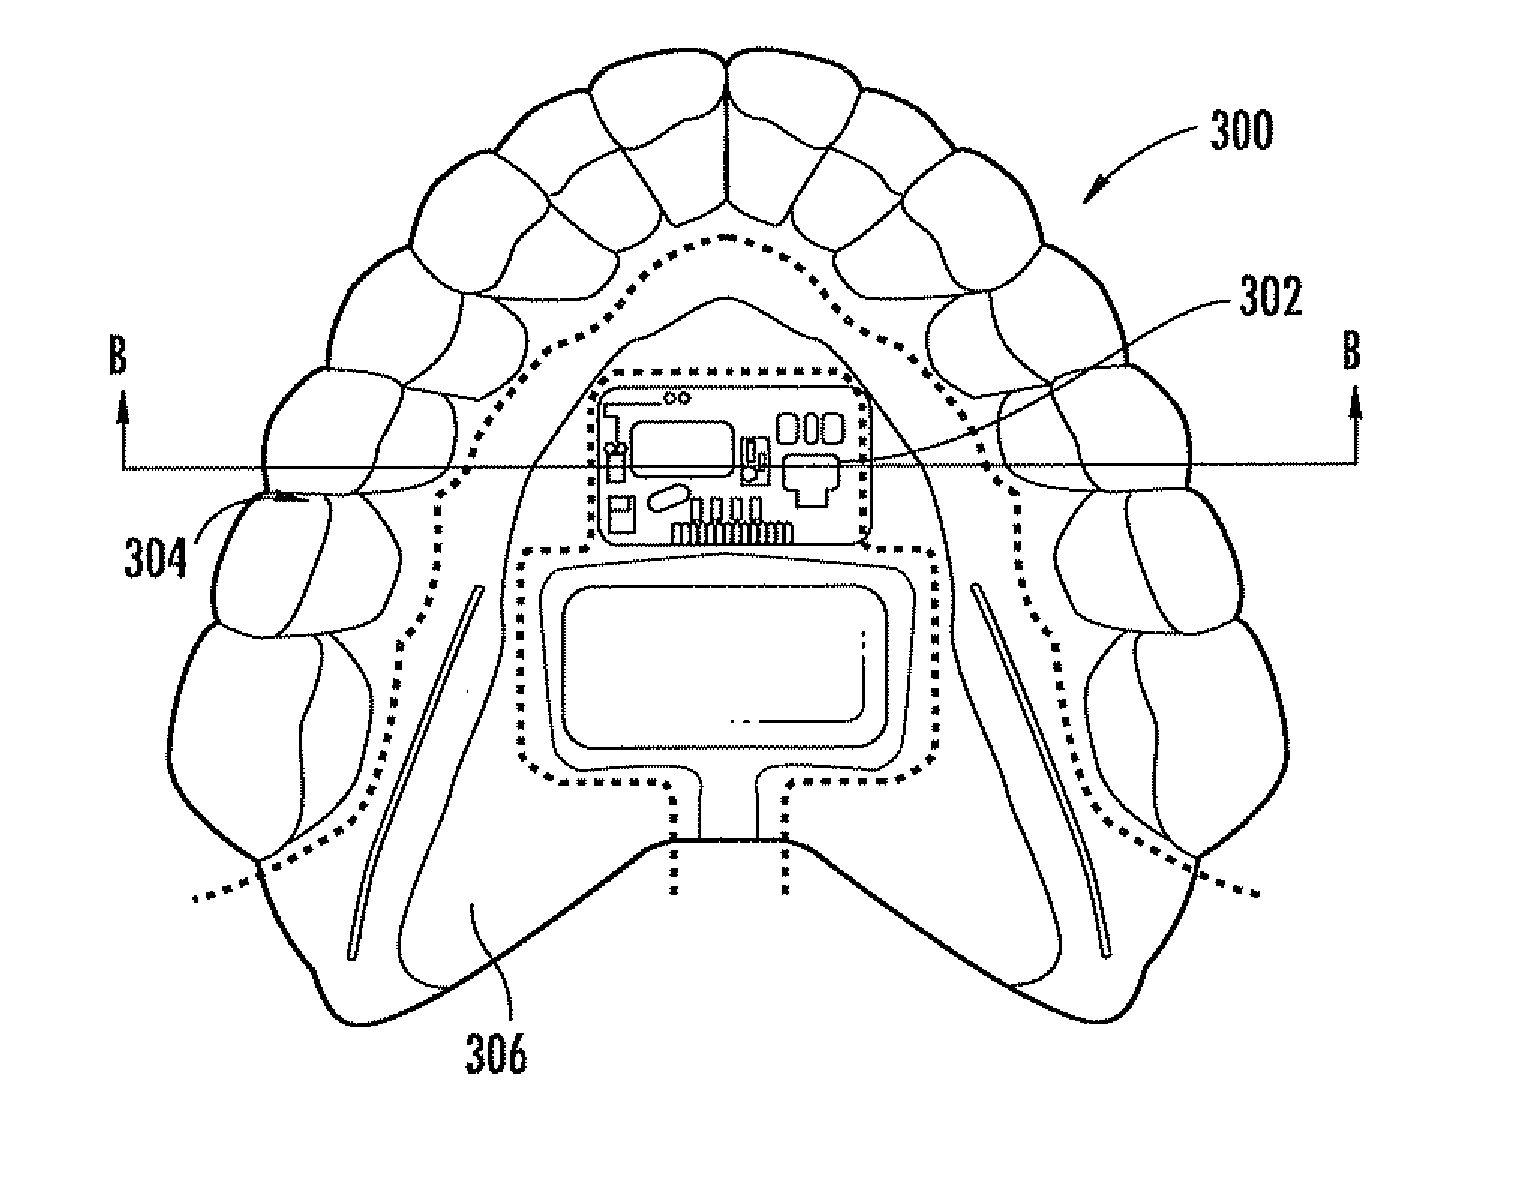 Electronic snore recording device and associated methods